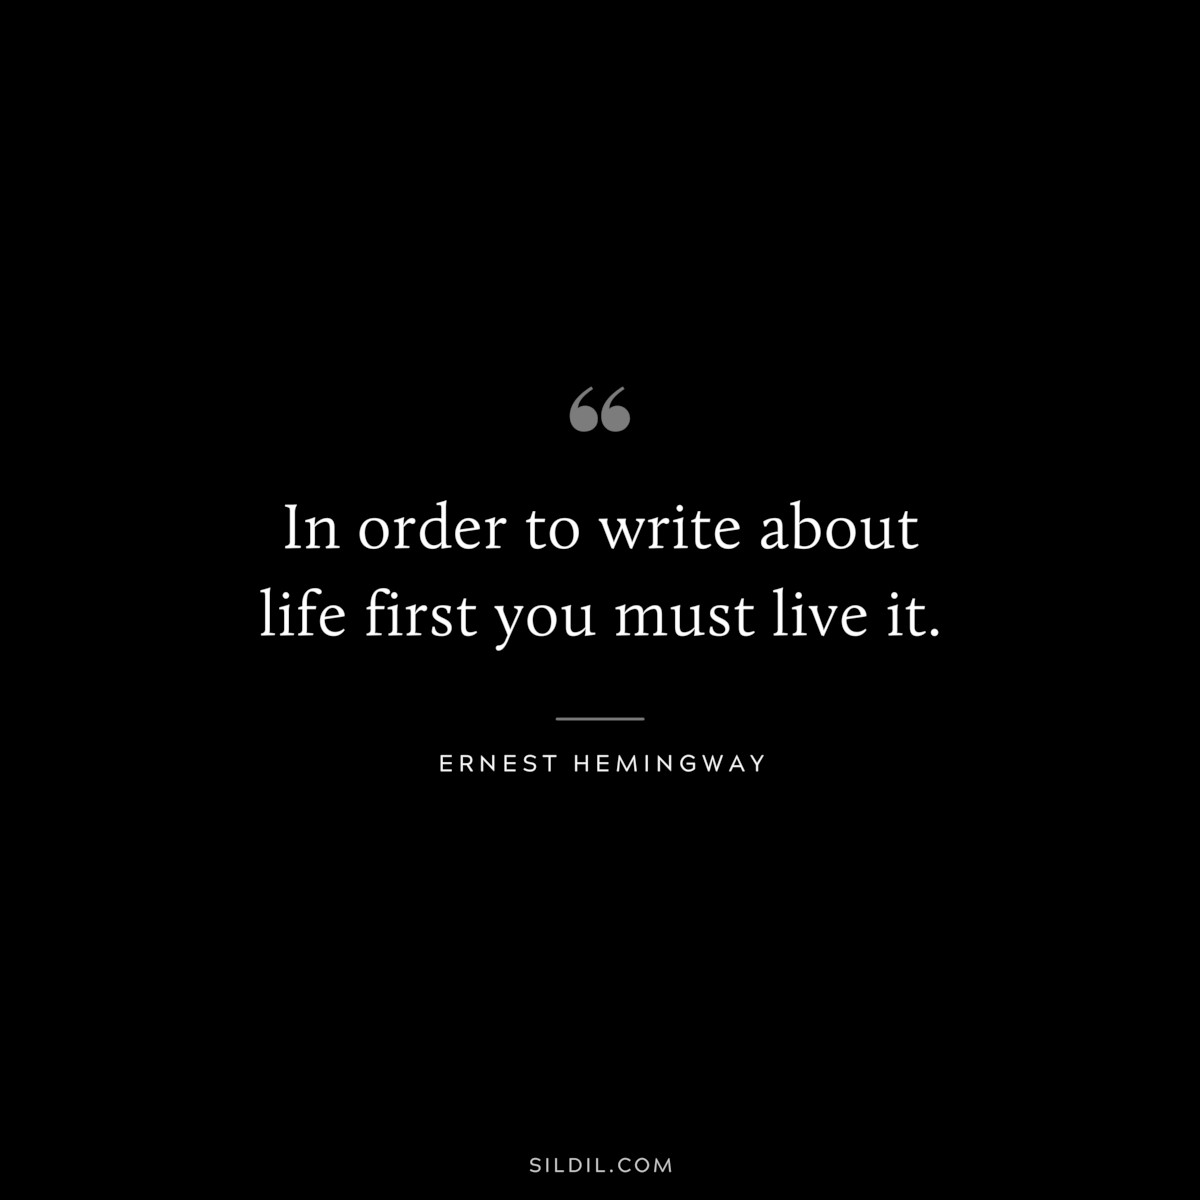 In order to write about life first you must live it. ― Ernest Hemingway